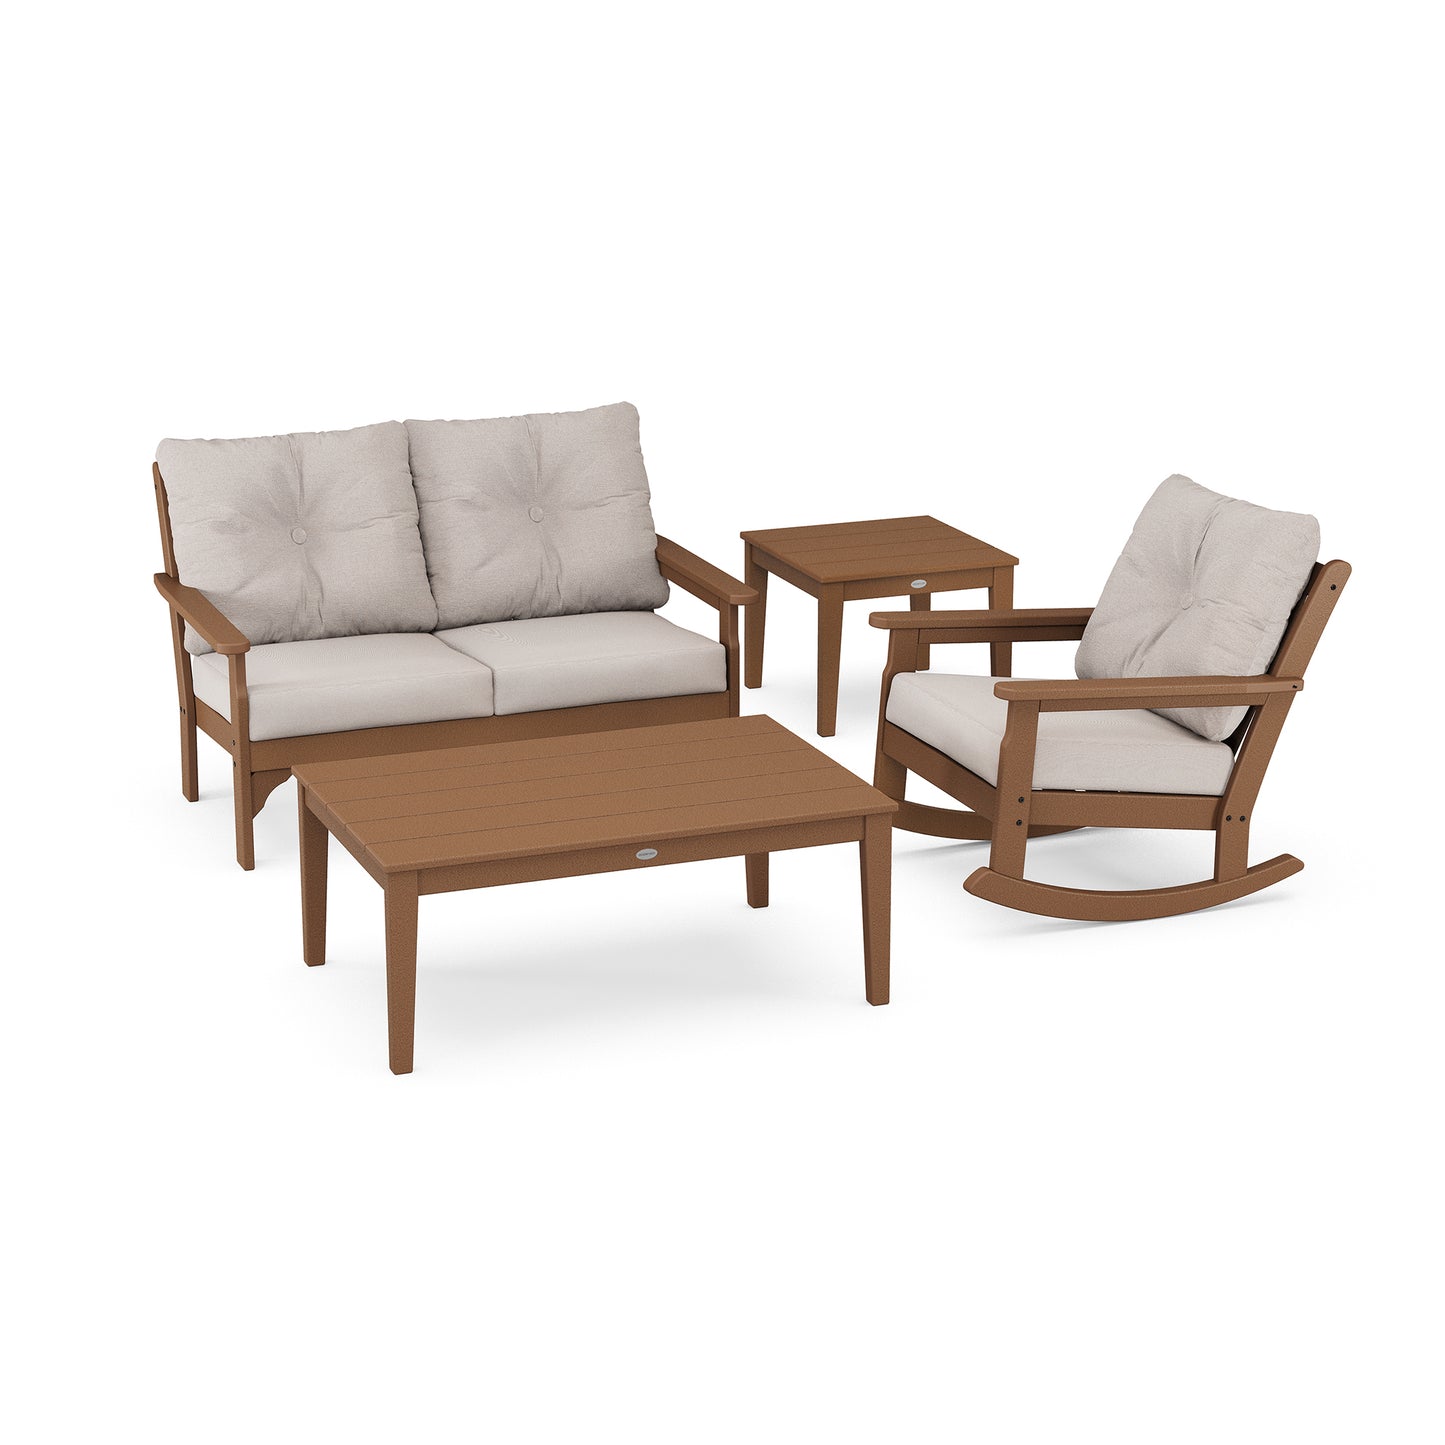 A luxury outdoor furniture set consisting of a POLYWOOD Vineyard 4-Piece Deep Seating Rocker Set, all made of wood with brown finish and equipped with light gray cushions. The chair on the right